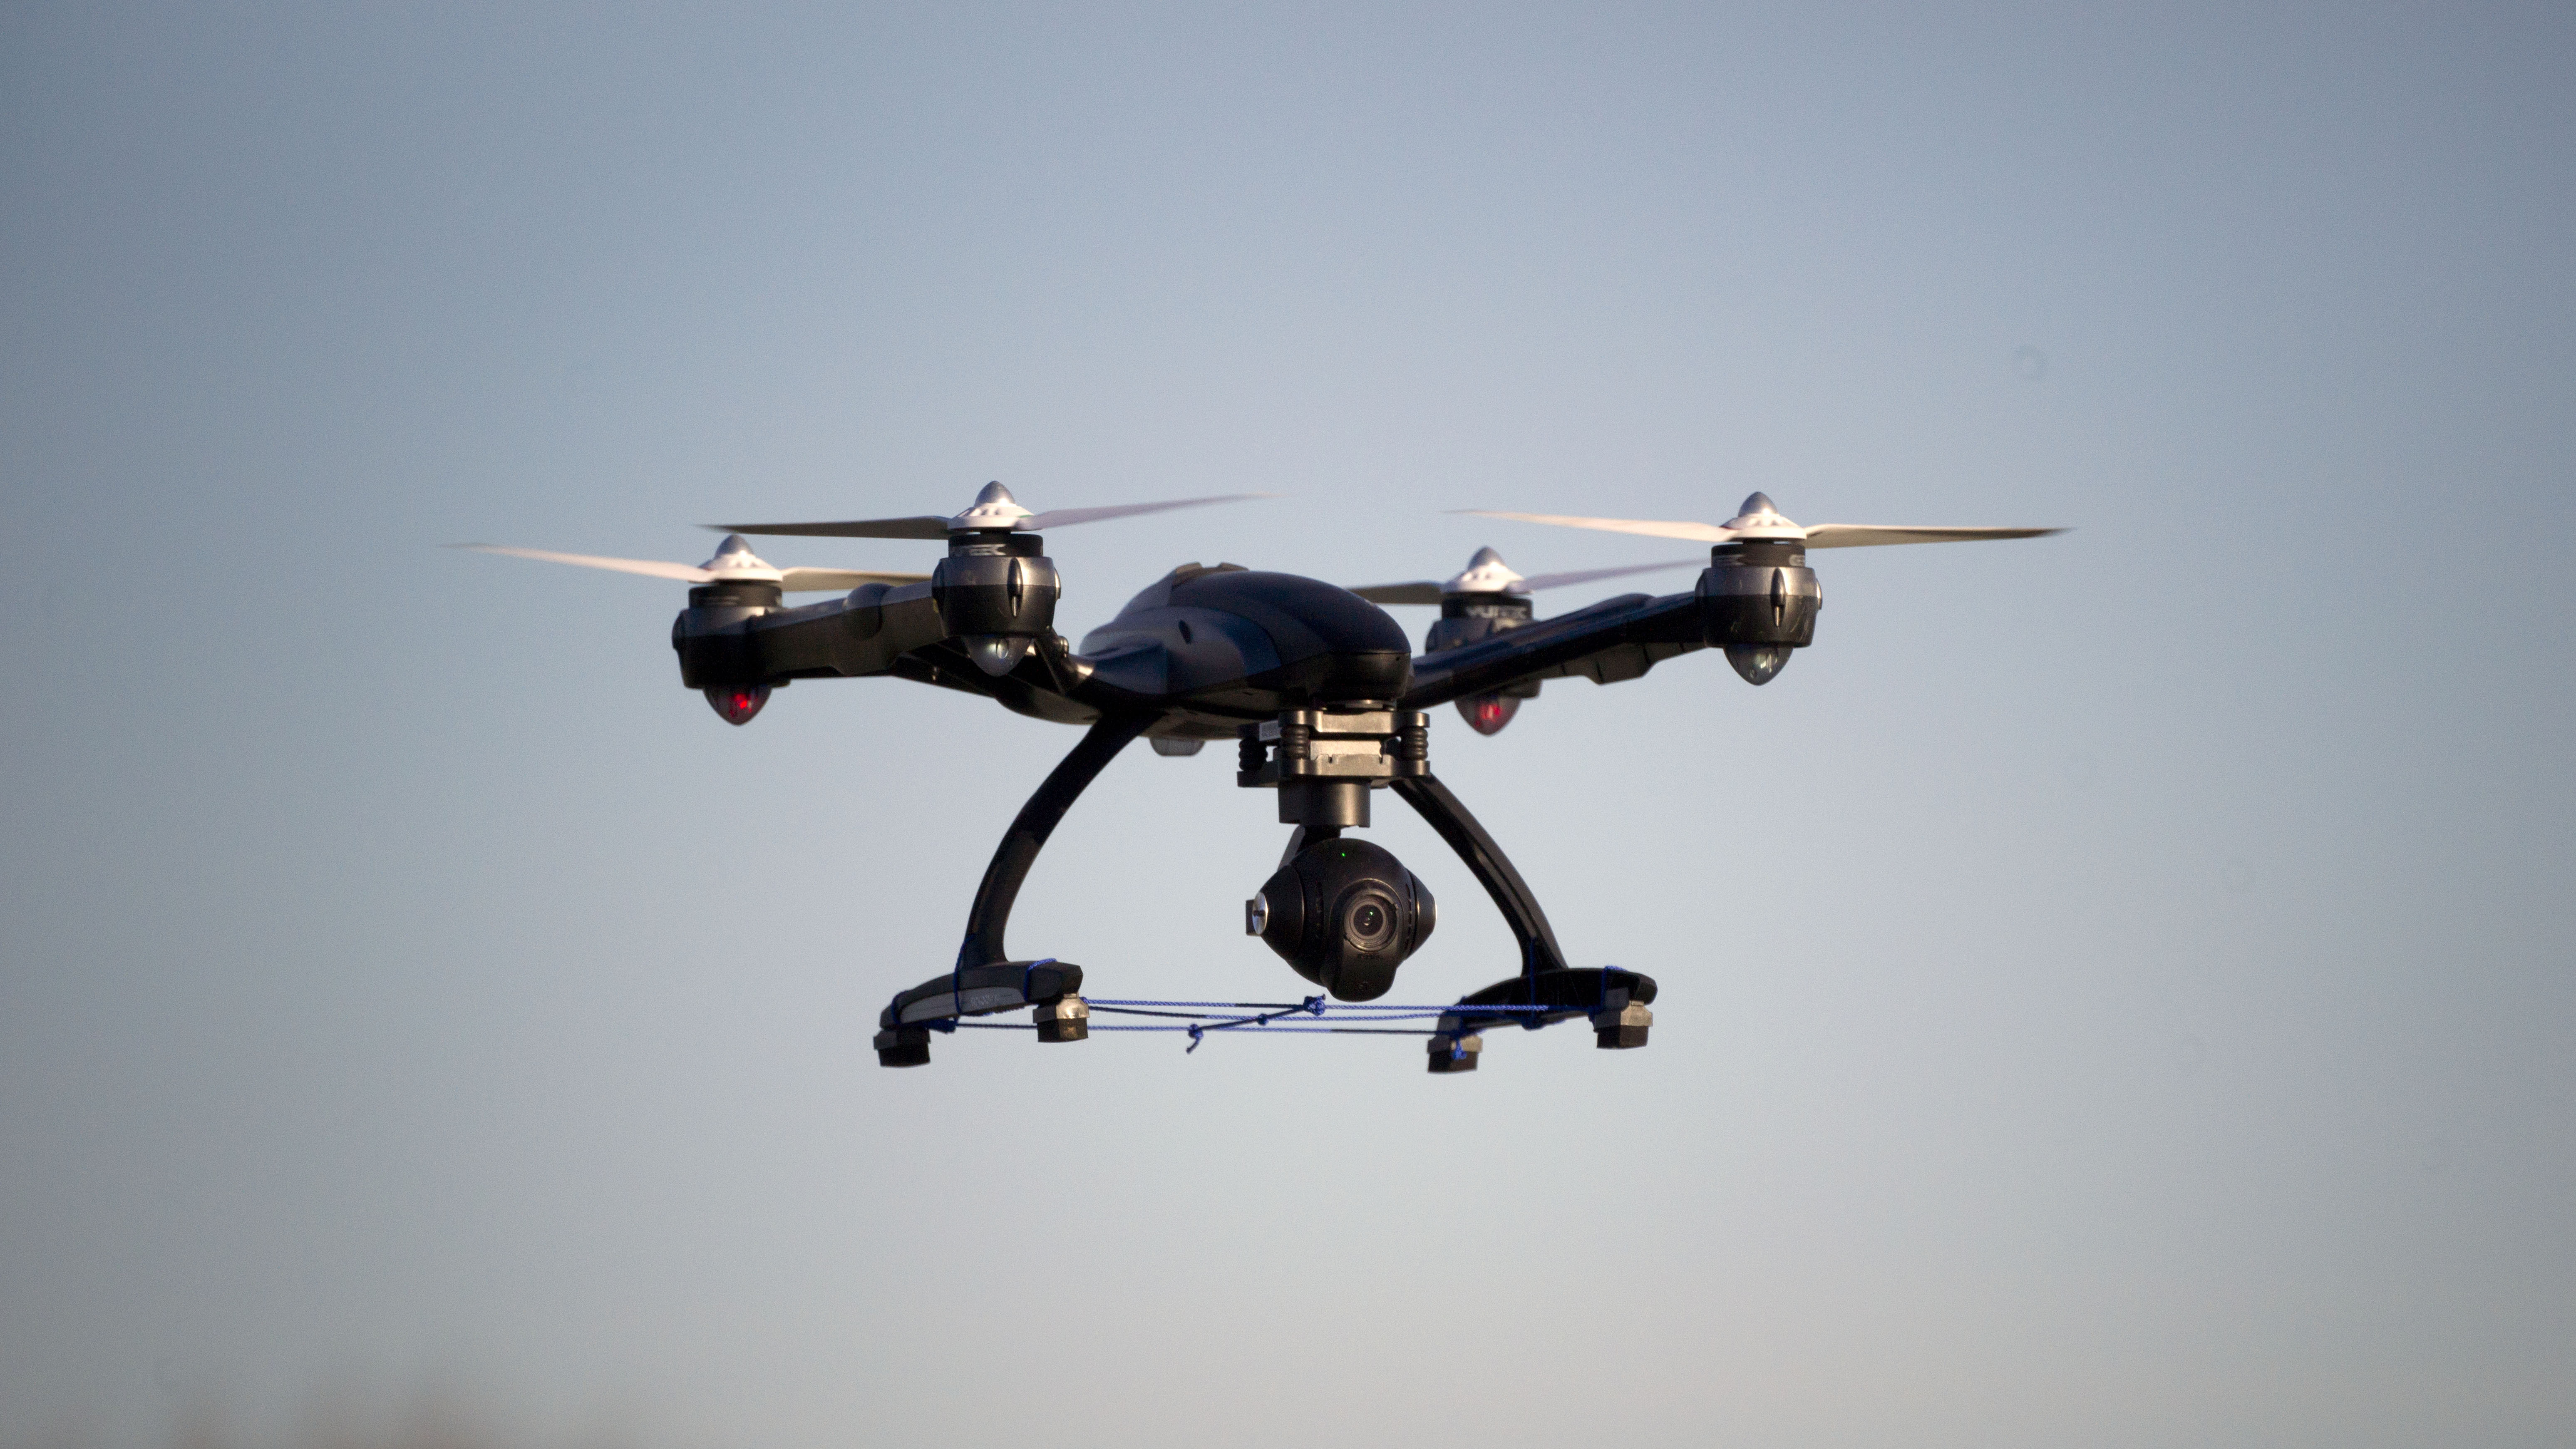 5 Steps to Safely (and Legally) Fly a Drone